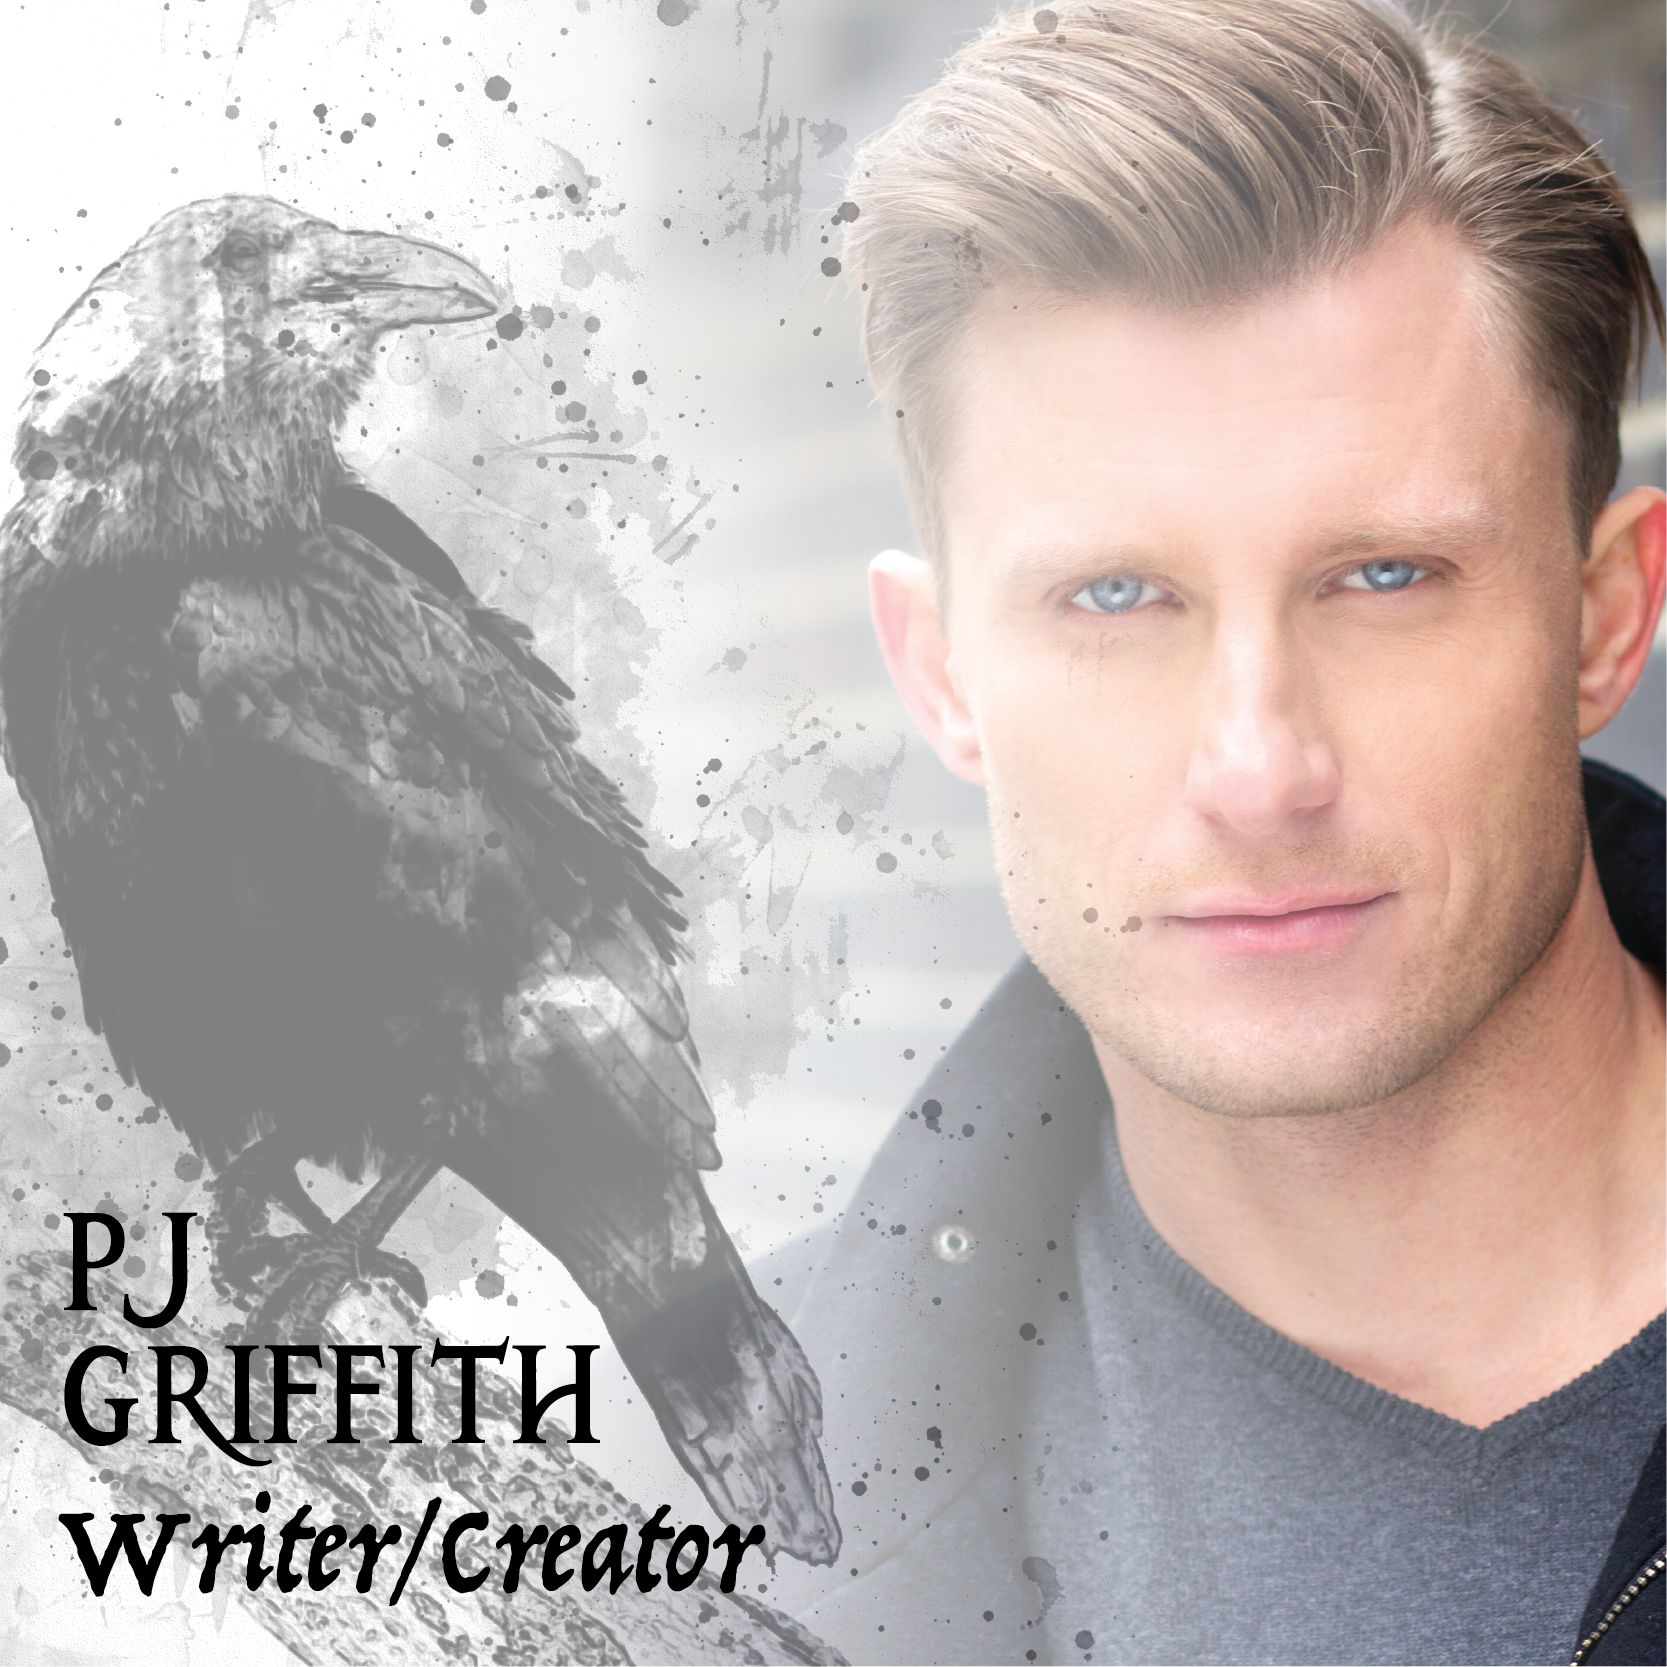 PJ Griffith is our Writer/Creator